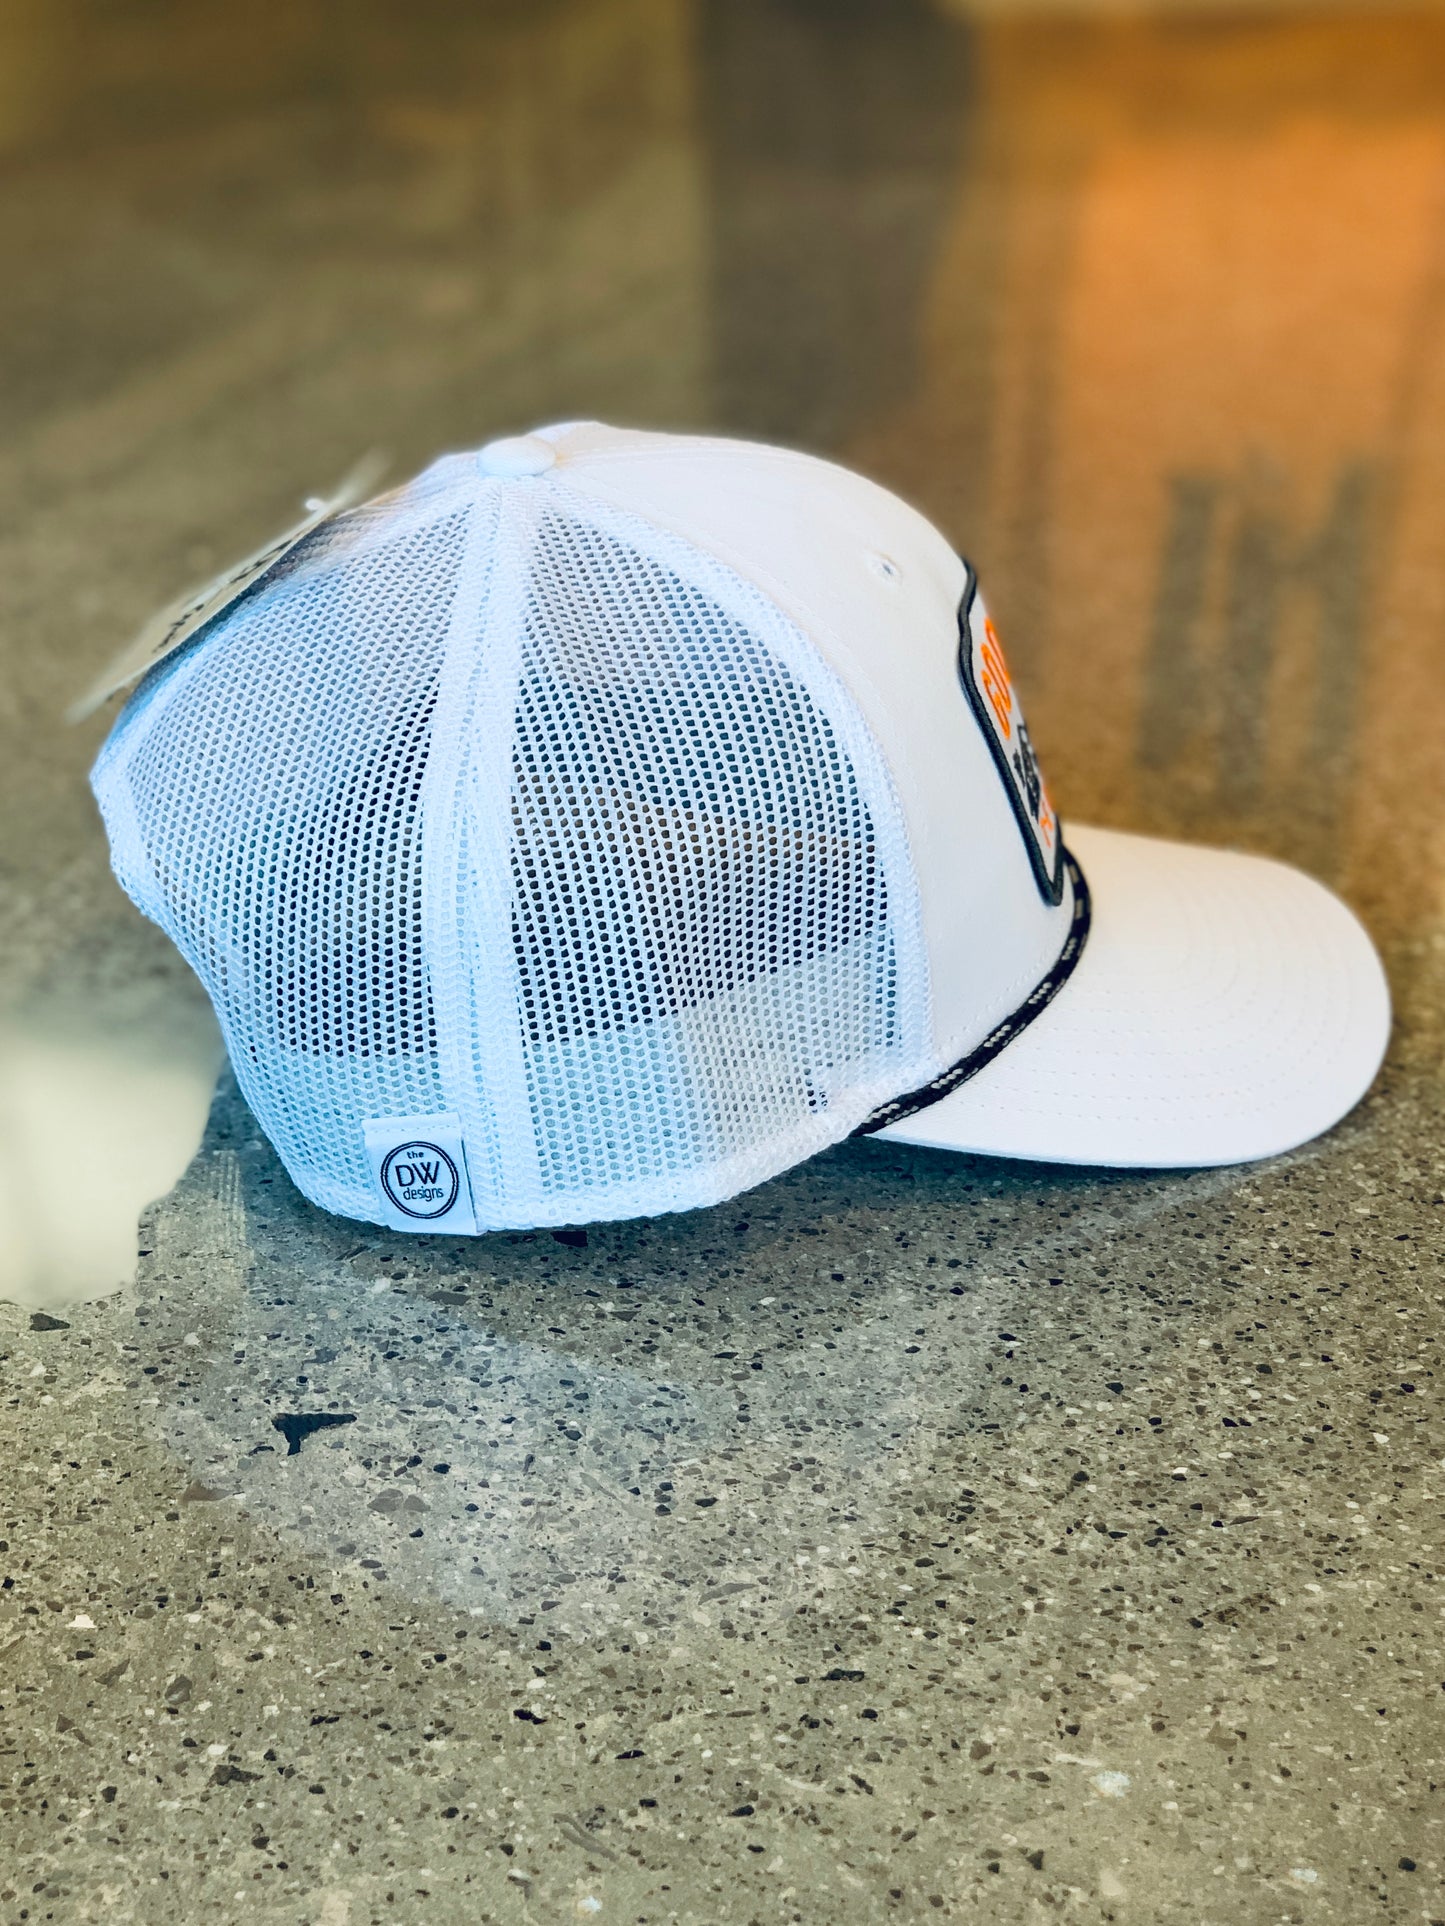 The Good Ole 5.0 Rope Trucker Hat - White